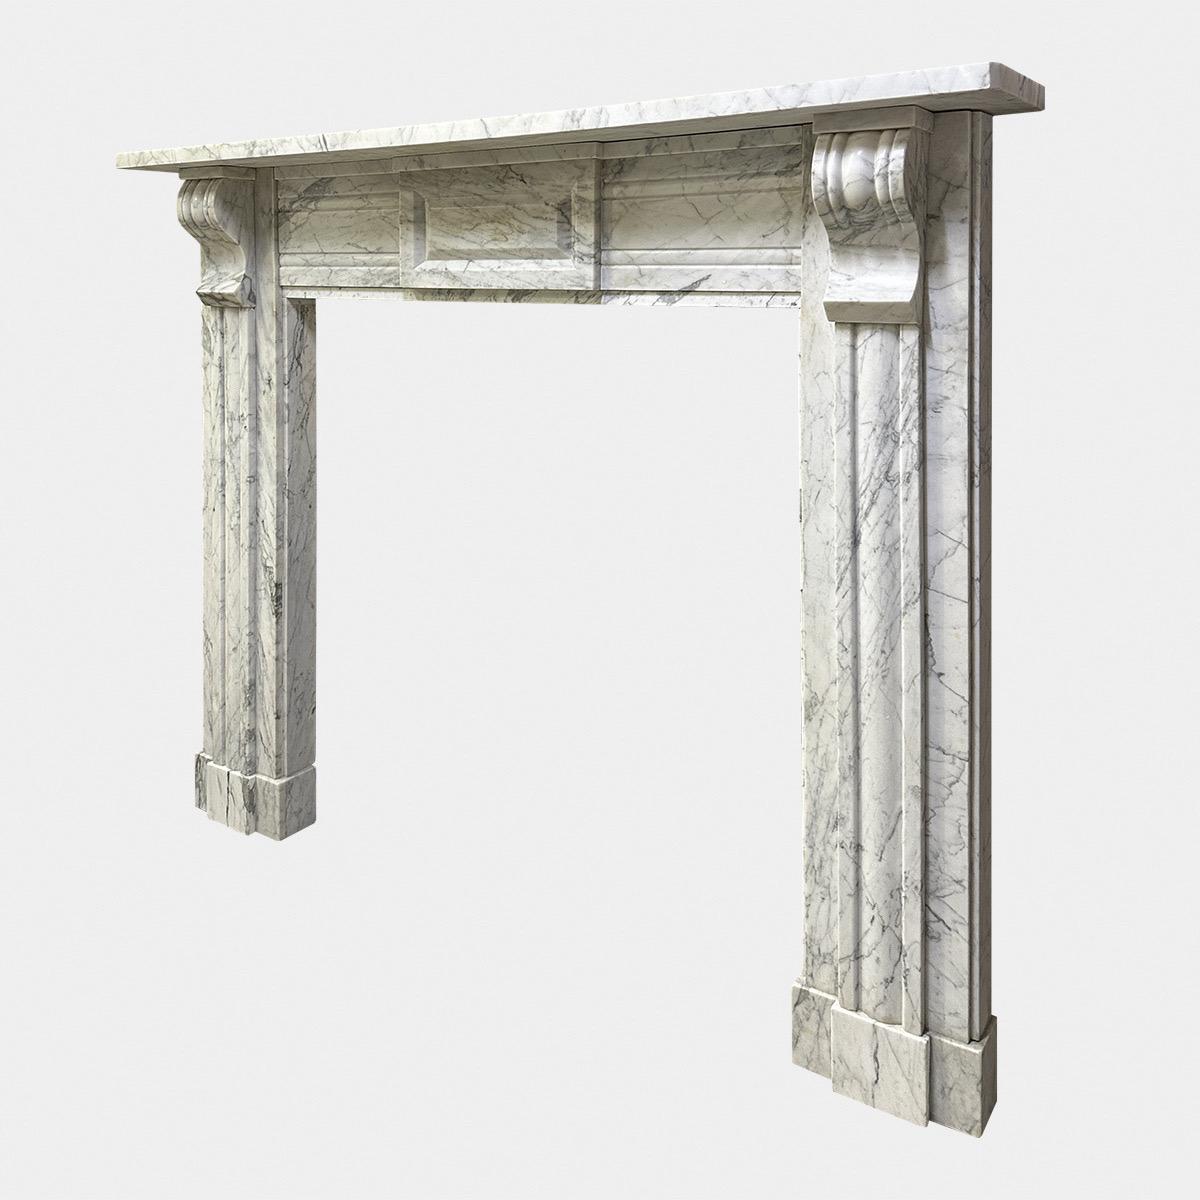 A well drawn and proportioned early 19th century antique Irish fireplace from the Regency period. The pilaster jambs with cushion mould panels to front,  with conforming detail on brackets. The large fielded panelled tablet with cushion moulded